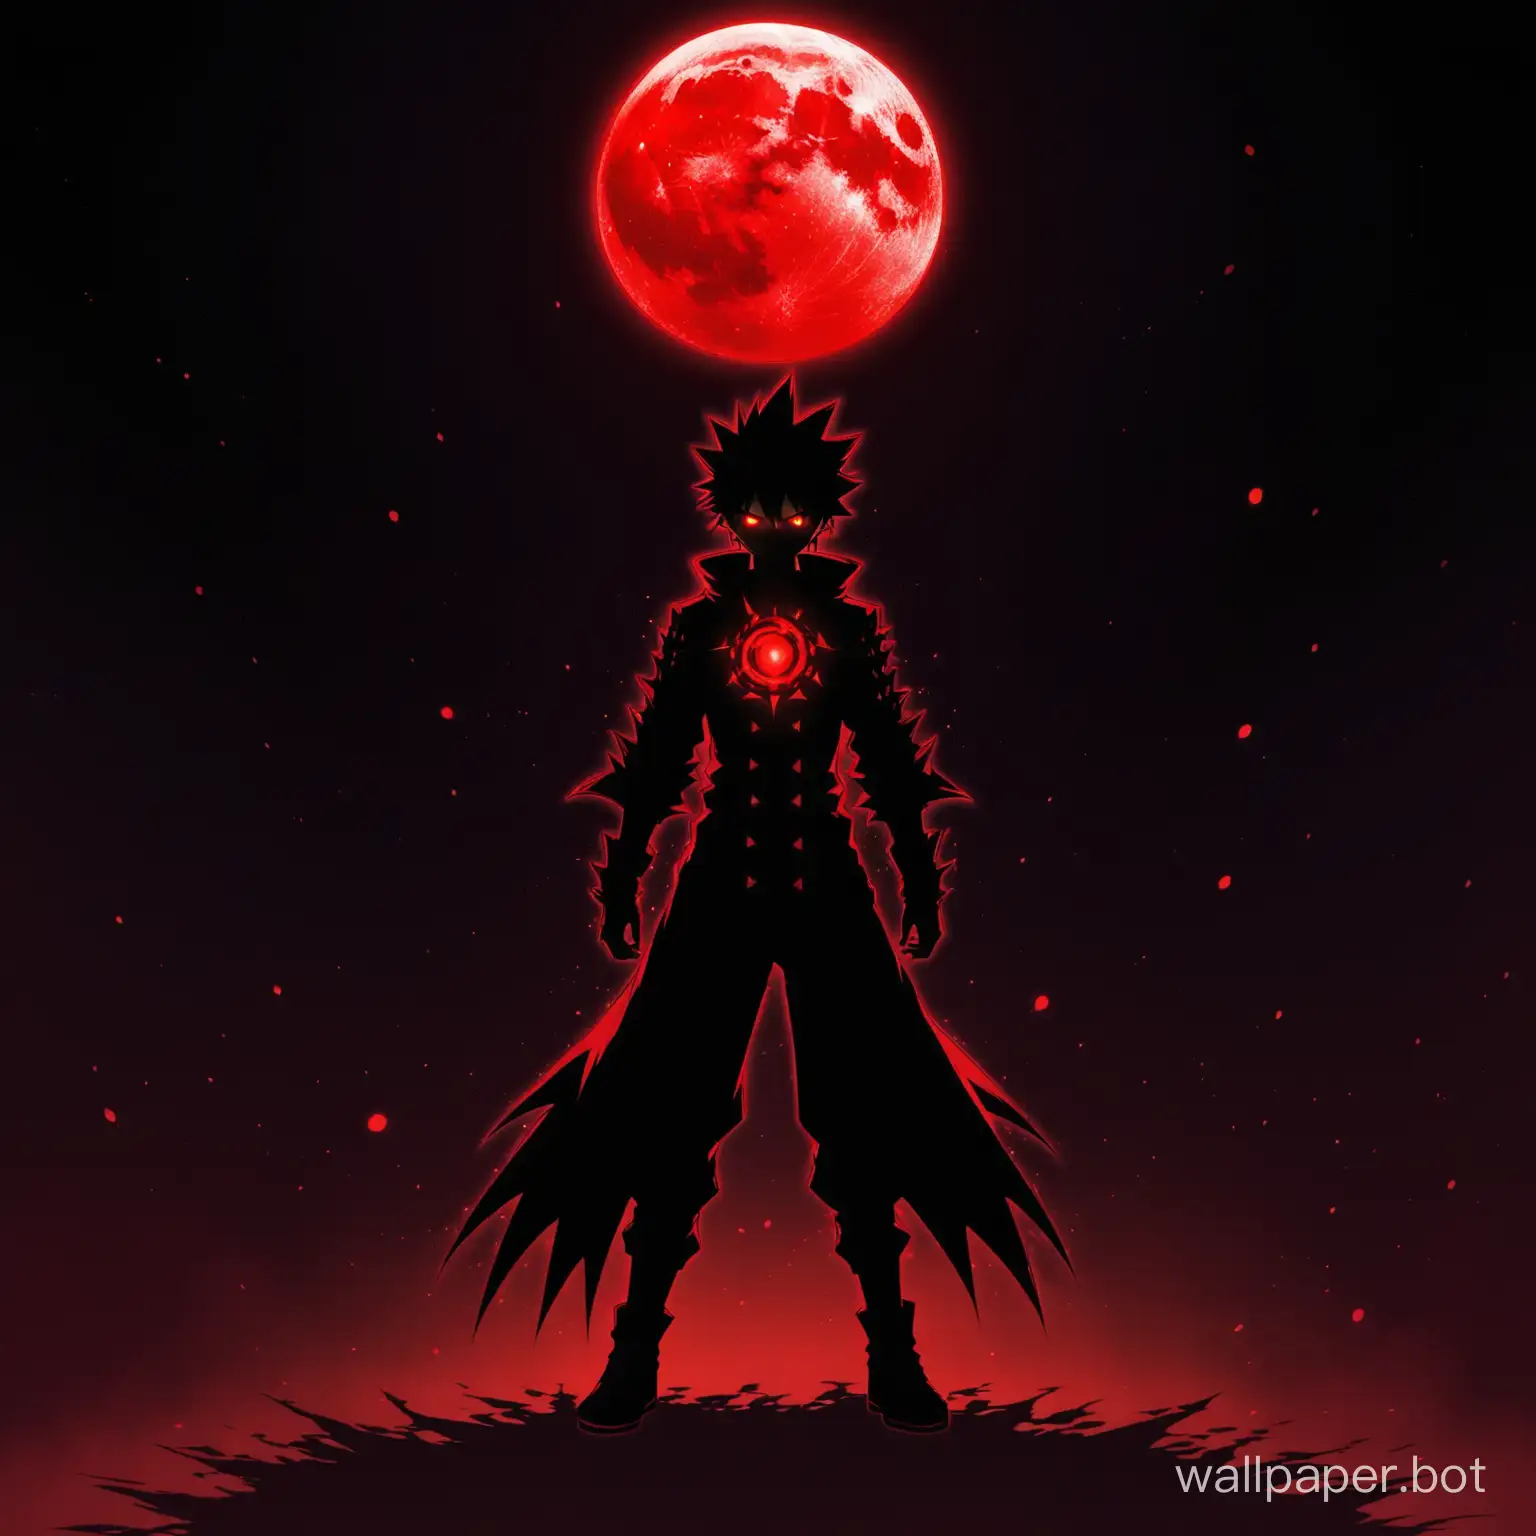 Mysterious-Anime-Boy-with-Glowing-Red-Eyes-in-Moonlight